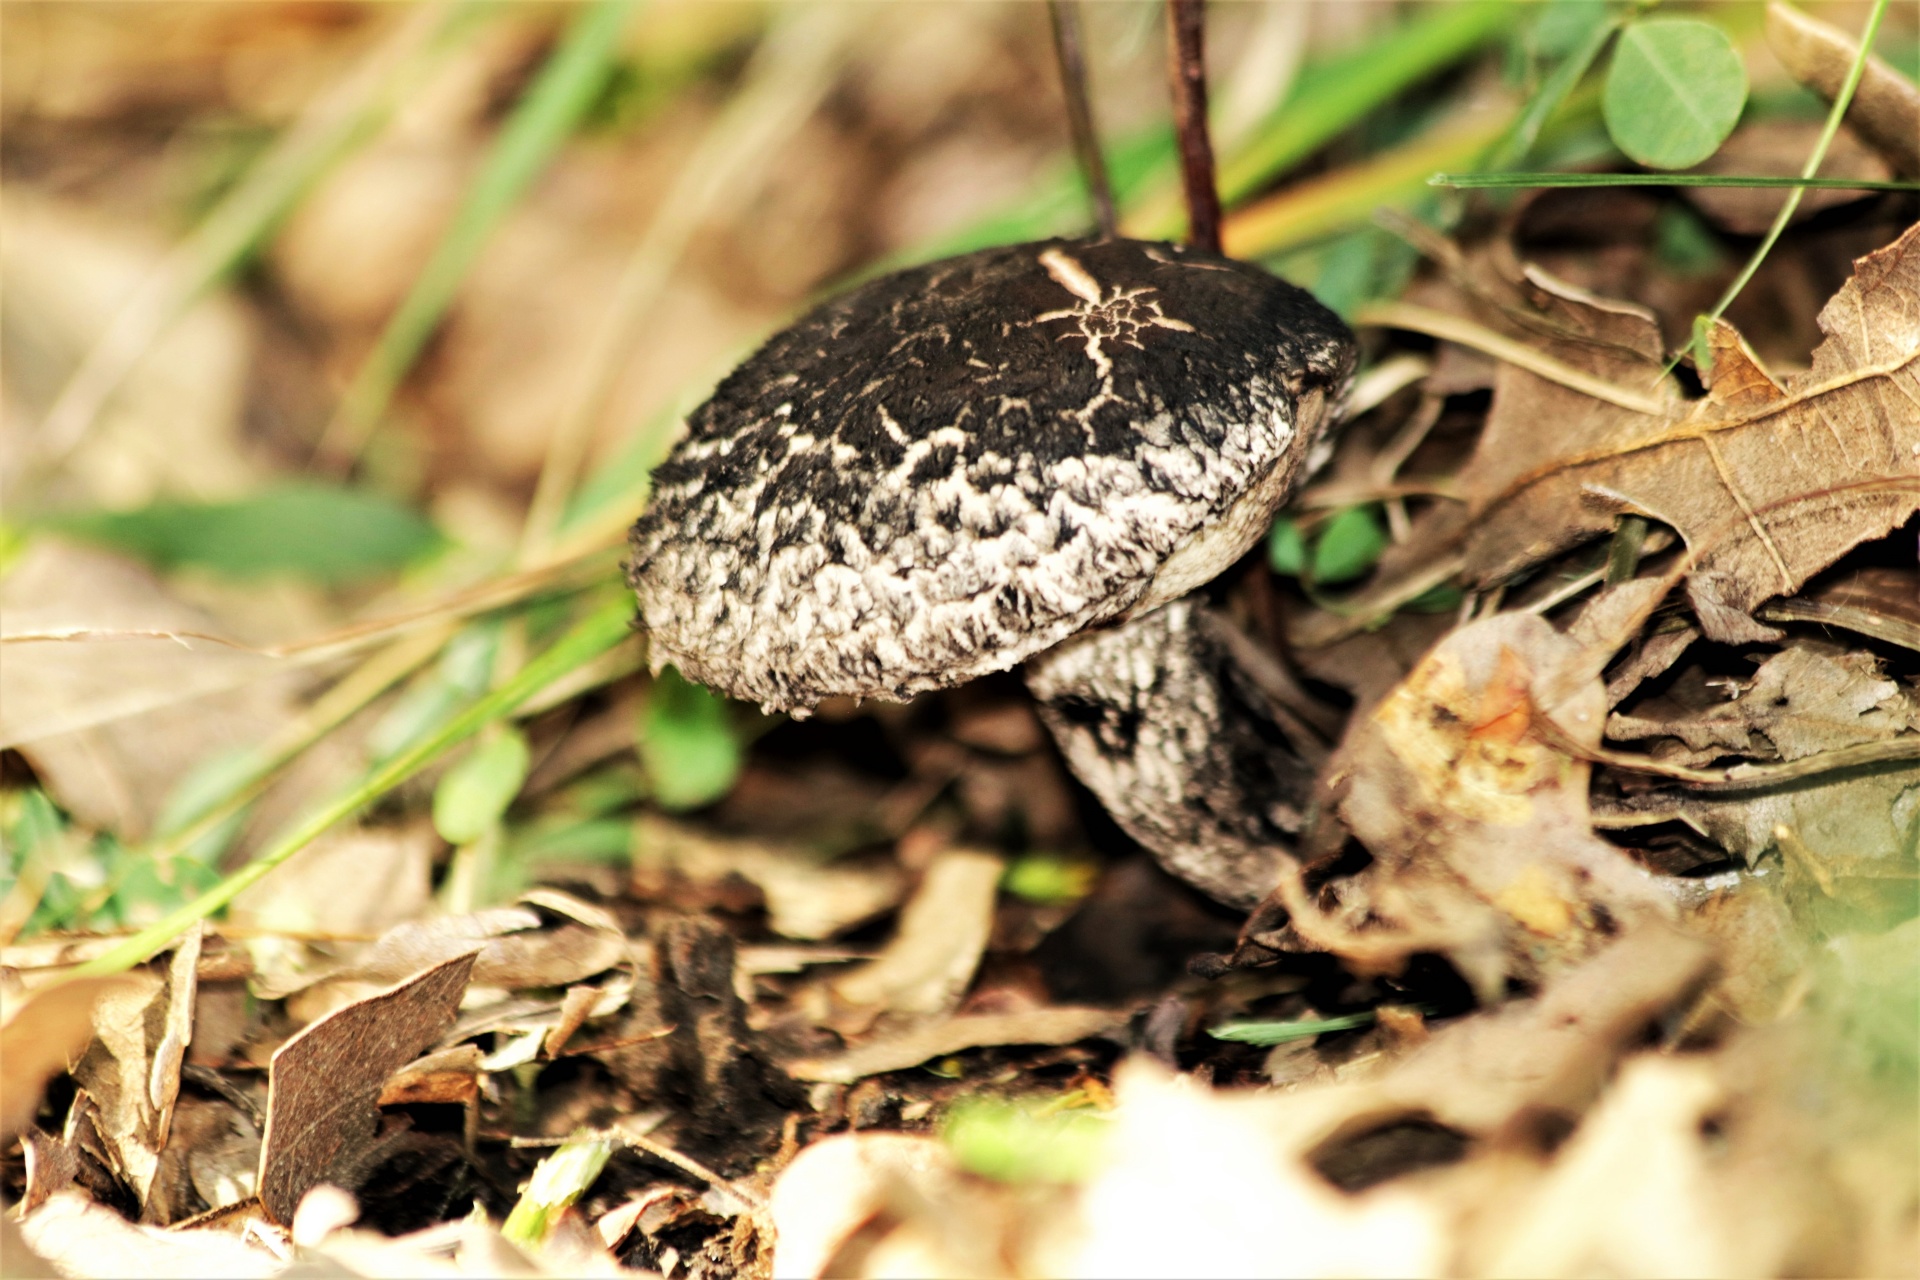 Close-up of a black and white mushroom as it comes up from under fallen leaves on the floor of the woods.